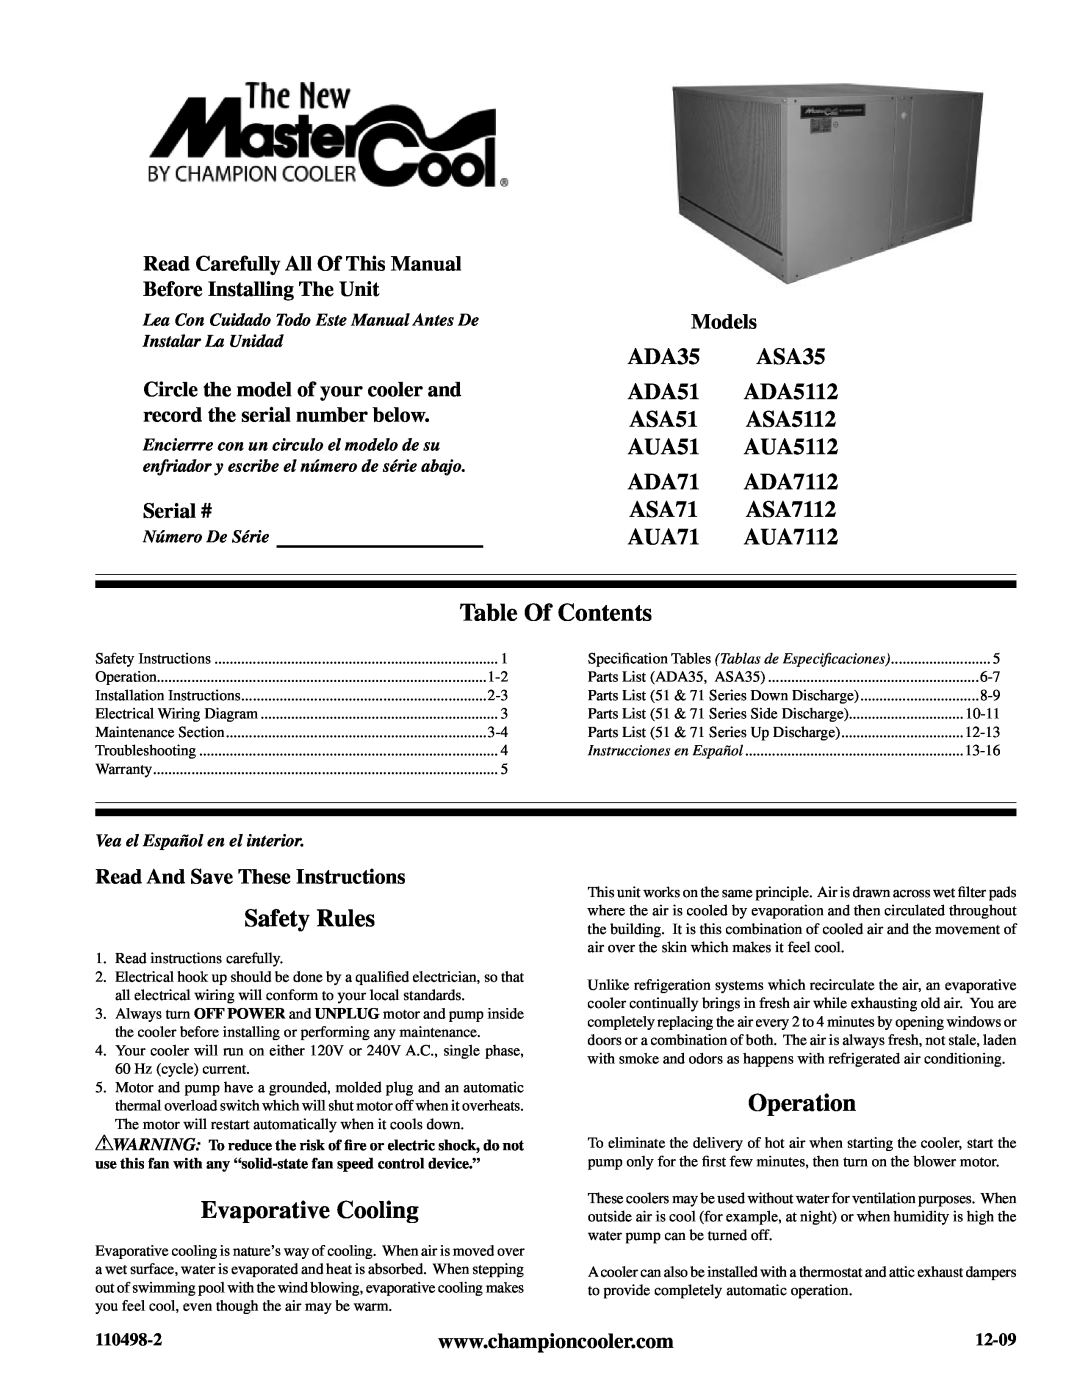 Essick Air ADA5112 installation instructions Table Of Contents, Safety Rules, Evaporative Cooling, Operation, ADA35, ASA35 